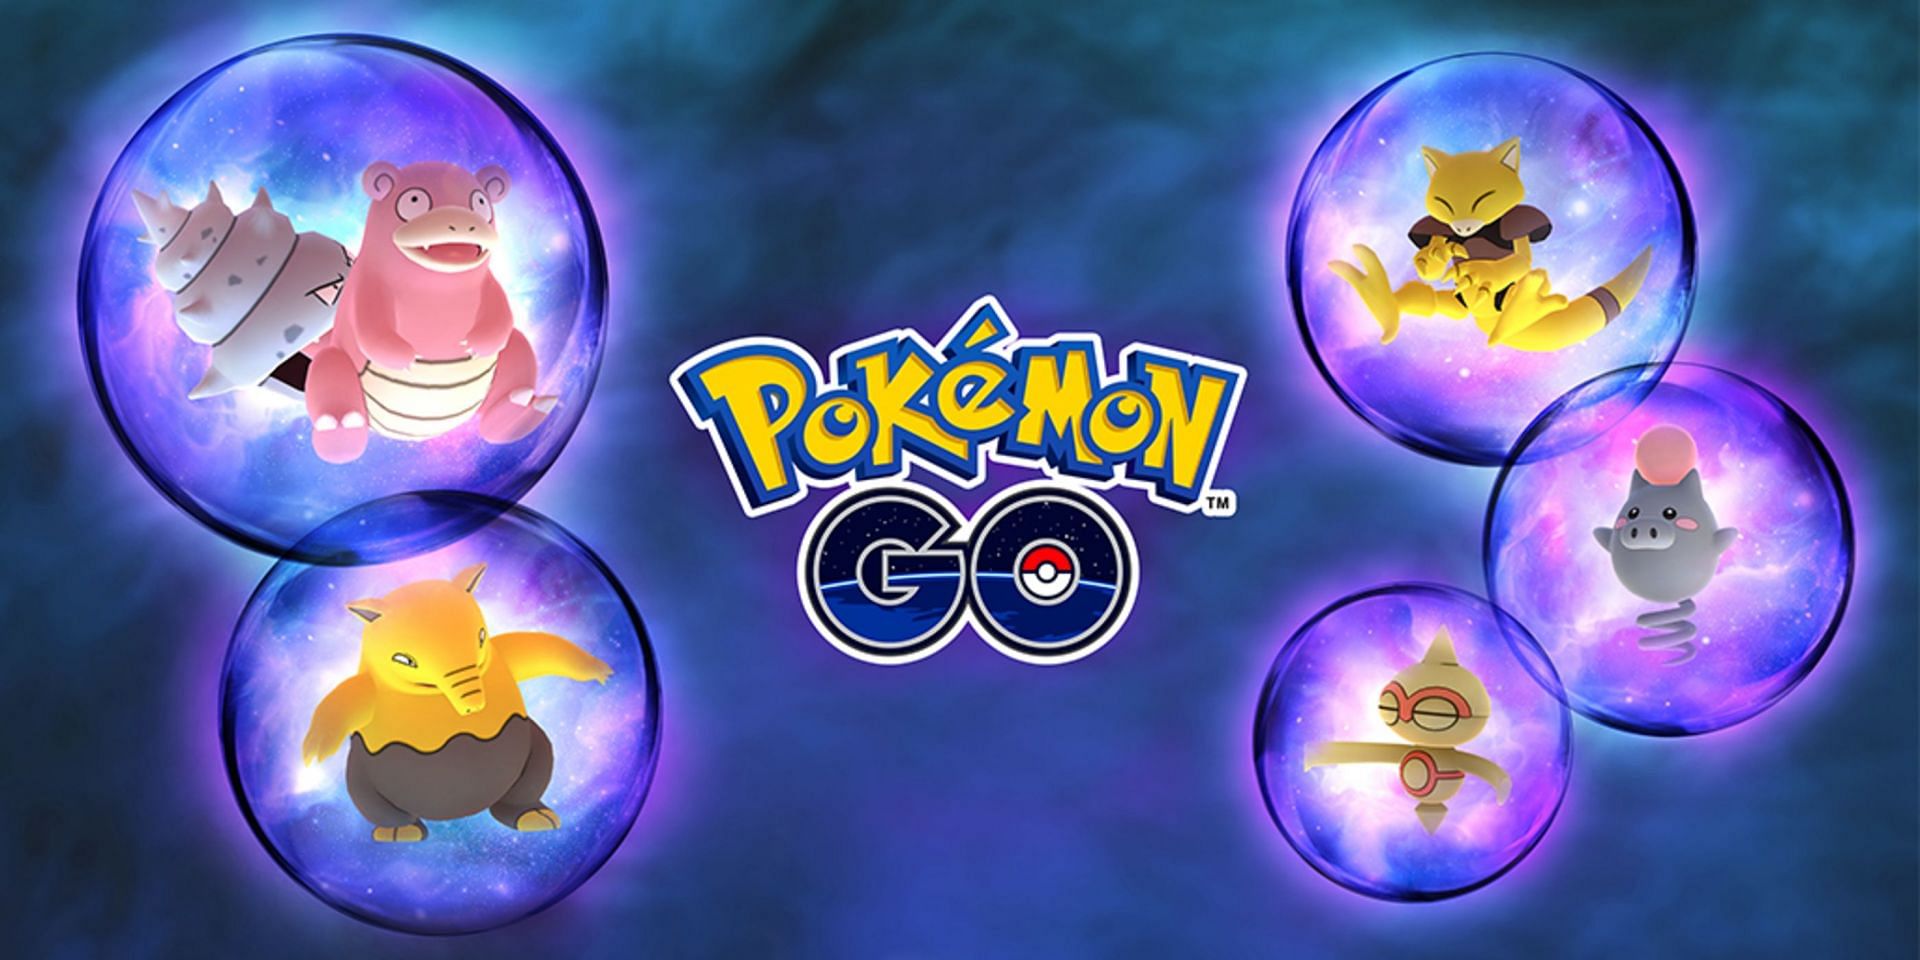 Psychic-type Pokemon are both popular and efficient in battle (Image via Niantic)